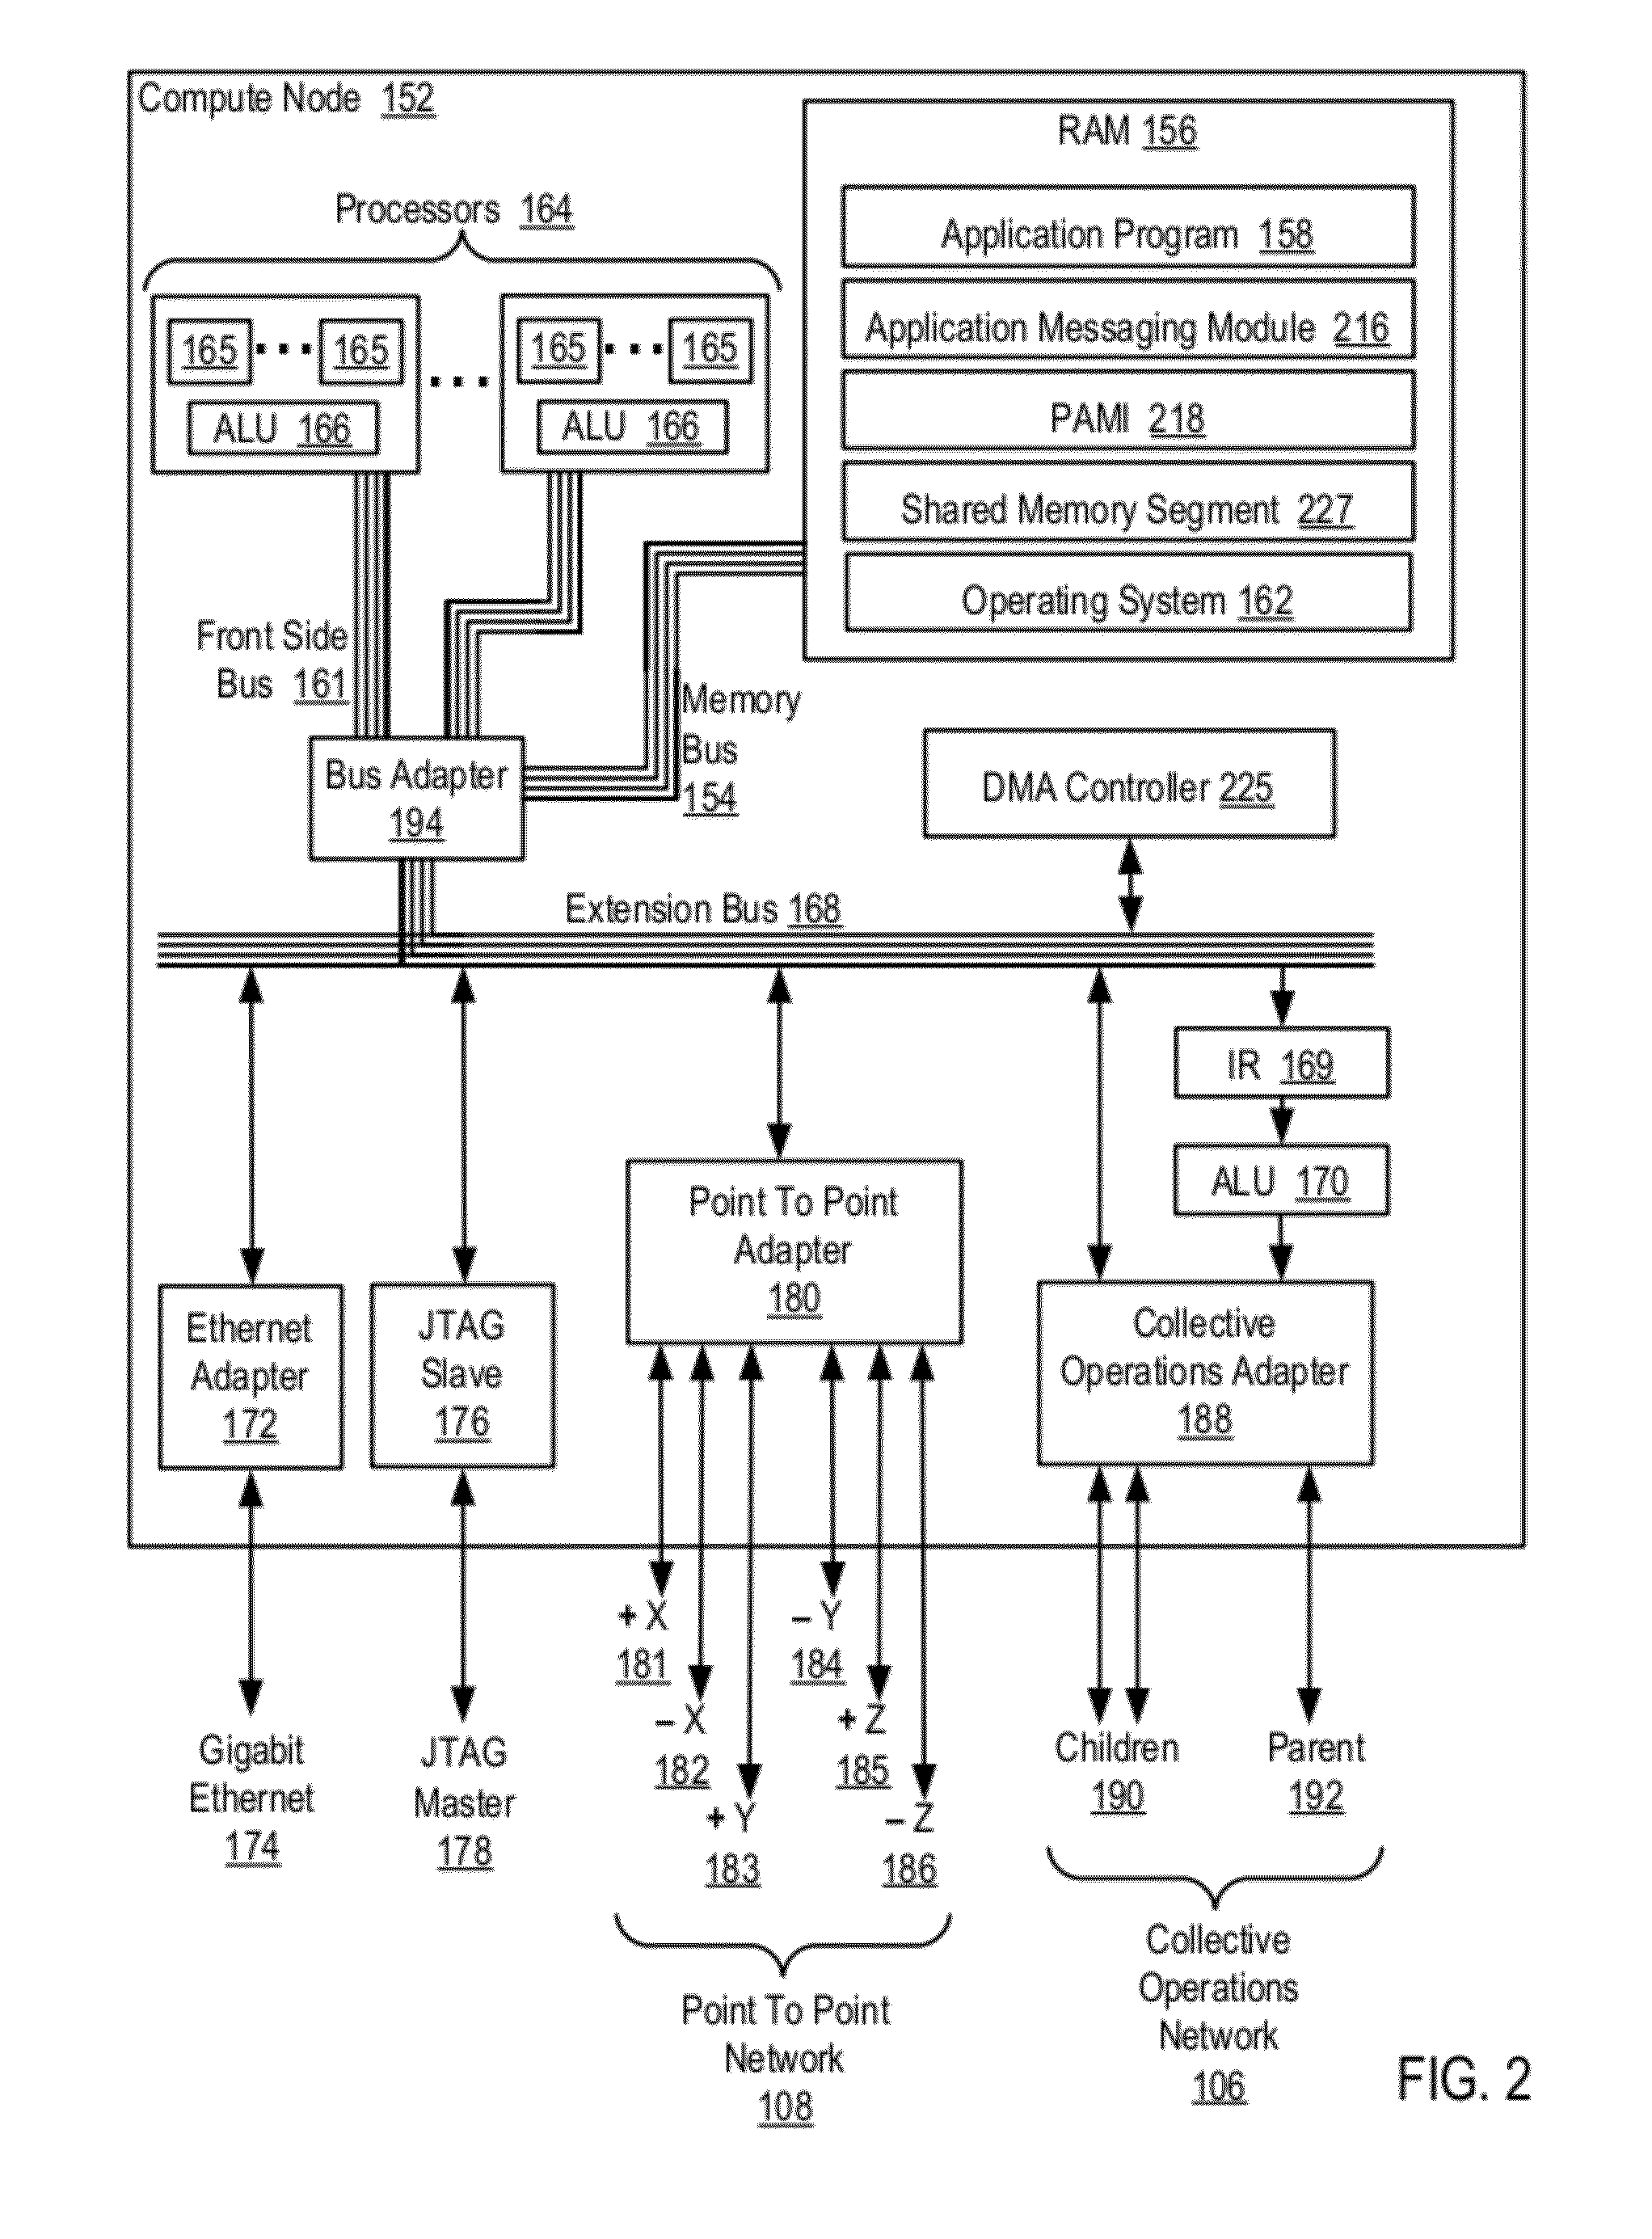 Data Communications For A Collective Operation In A Parallel Active Messaging Interface Of A Parallel Computer